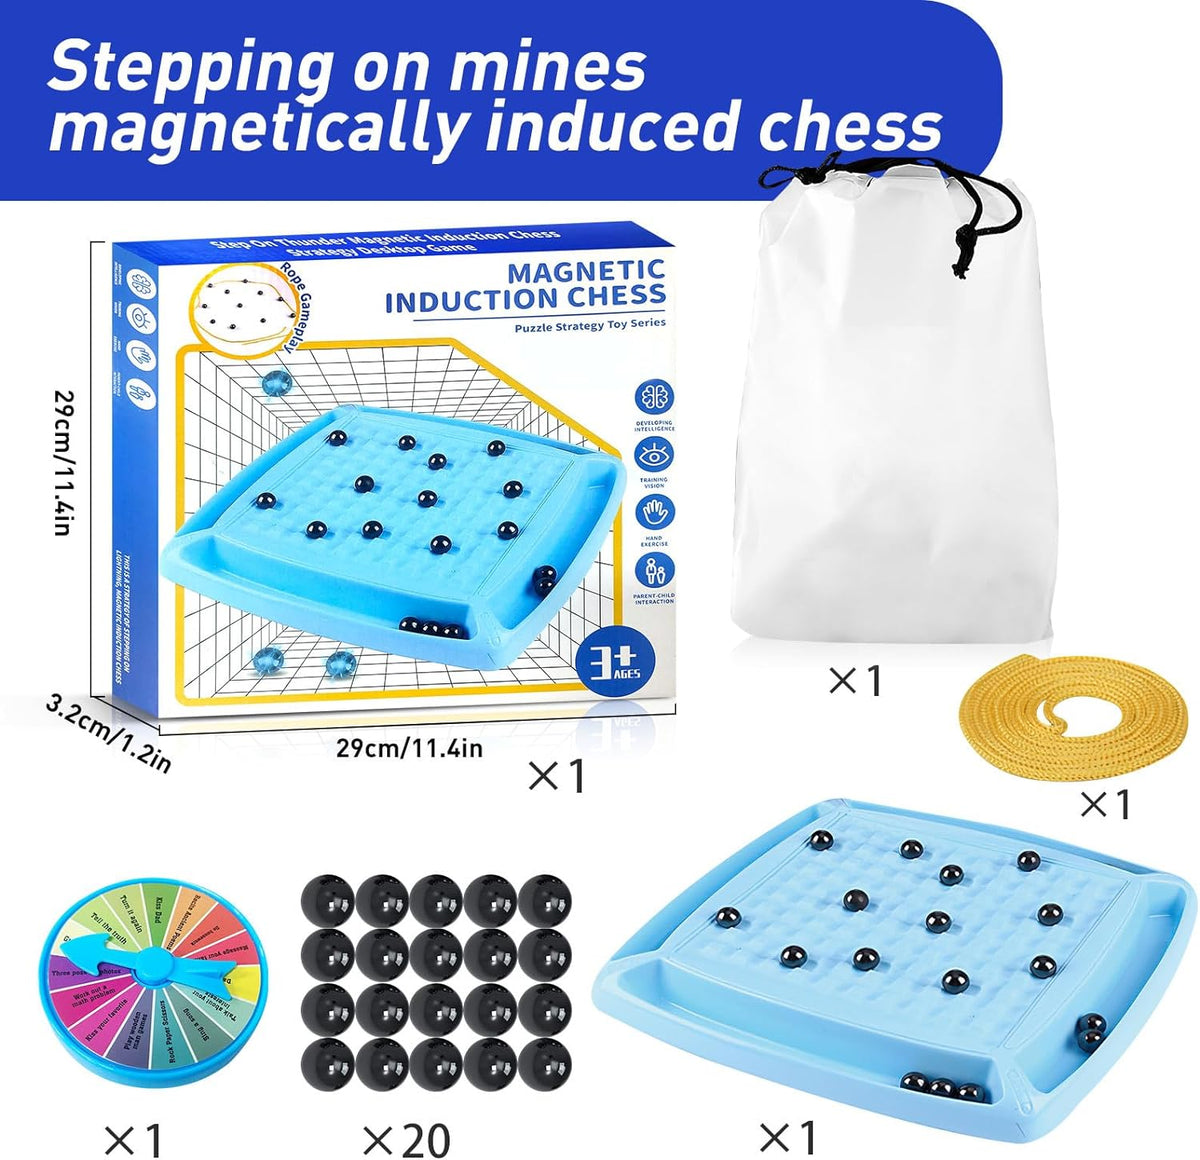 Magnetic Chess Game Magnetism Versus Chess Set, 20 Magnetic Balls Chess Board Game with Punishment Wheel Cykapu